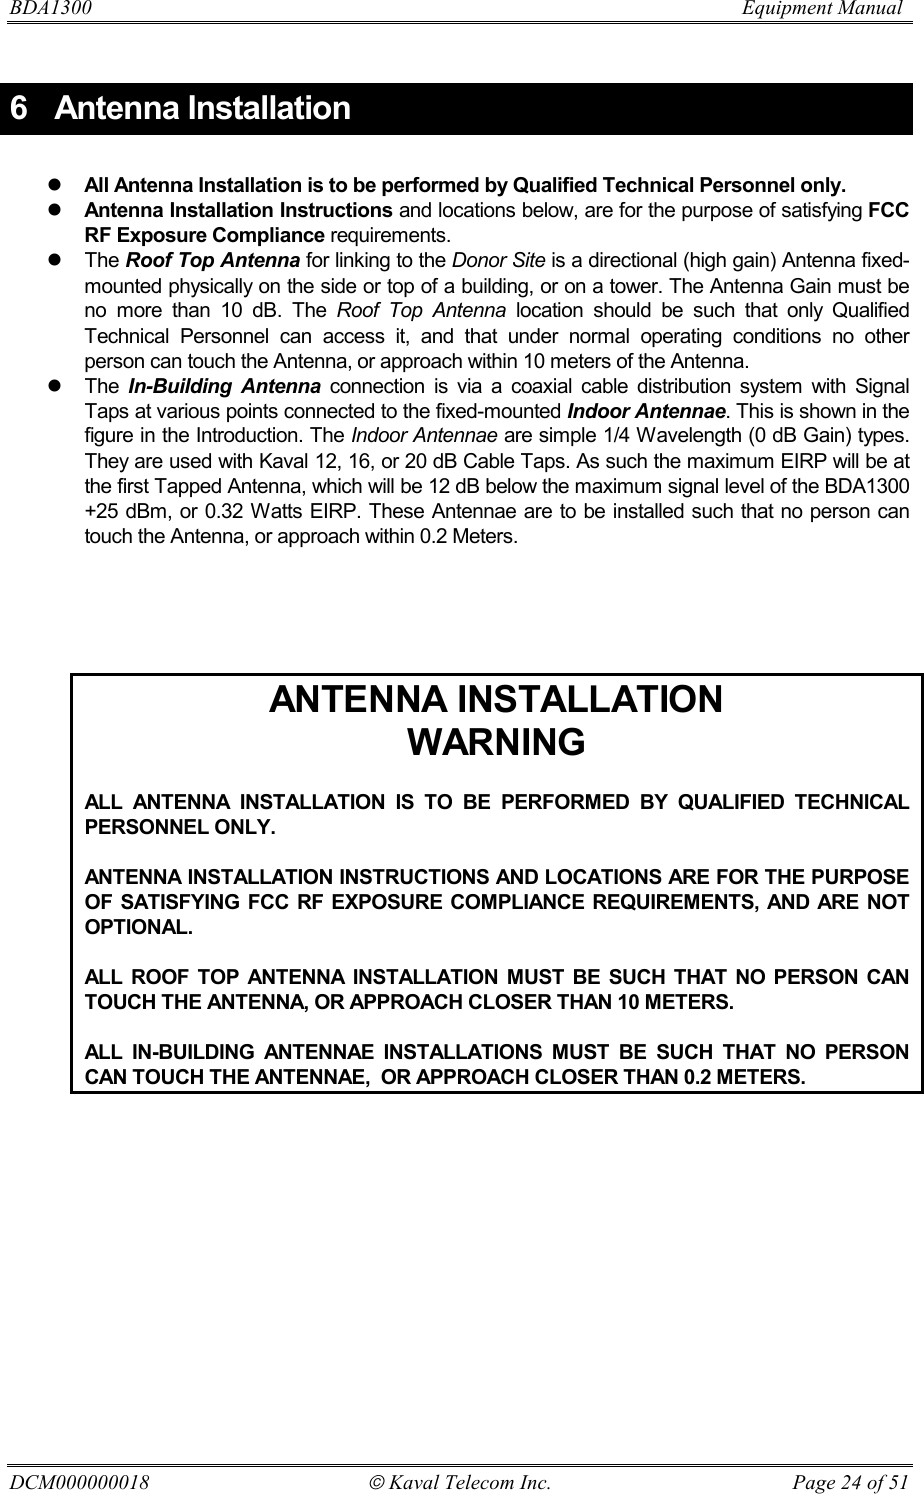 BDA1300                          Equipment Manual DCM000000018  Kaval Telecom Inc.  Page 24 of 51 6 Antenna Installation  ! All Antenna Installation is to be performed by Qualified Technical Personnel only. ! Antenna Installation Instructions and locations below, are for the purpose of satisfying FCC RF Exposure Compliance requirements. ! The Roof Top Antenna for linking to the Donor Site is a directional (high gain) Antenna fixed-mounted physically on the side or top of a building, or on a tower. The Antenna Gain must be no more than 10 dB. The Roof Top Antenna location should be such that only Qualified Technical Personnel can access it, and that under normal operating conditions no other person can touch the Antenna, or approach within 10 meters of the Antenna. ! The In-Building Antenna connection is via a coaxial cable distribution system with Signal Taps at various points connected to the fixed-mounted Indoor Antennae. This is shown in the figure in the Introduction. The Indoor Antennae are simple 1/4 Wavelength (0 dB Gain) types. They are used with Kaval 12, 16, or 20 dB Cable Taps. As such the maximum EIRP will be at the first Tapped Antenna, which will be 12 dB below the maximum signal level of the BDA1300 +25 dBm, or 0.32 Watts EIRP. These Antennae are to be installed such that no person can touch the Antenna, or approach within 0.2 Meters.      ANTENNA INSTALLATION WARNING  ALL ANTENNA INSTALLATION IS TO BE PERFORMED BY QUALIFIED TECHNICAL PERSONNEL ONLY.  ANTENNA INSTALLATION INSTRUCTIONS AND LOCATIONS ARE FOR THE PURPOSE OF SATISFYING FCC RF EXPOSURE COMPLIANCE REQUIREMENTS, AND ARE NOT OPTIONAL.  ALL ROOF TOP ANTENNA INSTALLATION MUST BE SUCH THAT NO PERSON CAN TOUCH THE ANTENNA, OR APPROACH CLOSER THAN 10 METERS.  ALL IN-BUILDING ANTENNAE INSTALLATIONS MUST BE SUCH THAT NO PERSON CAN TOUCH THE ANTENNAE,  OR APPROACH CLOSER THAN 0.2 METERS.   